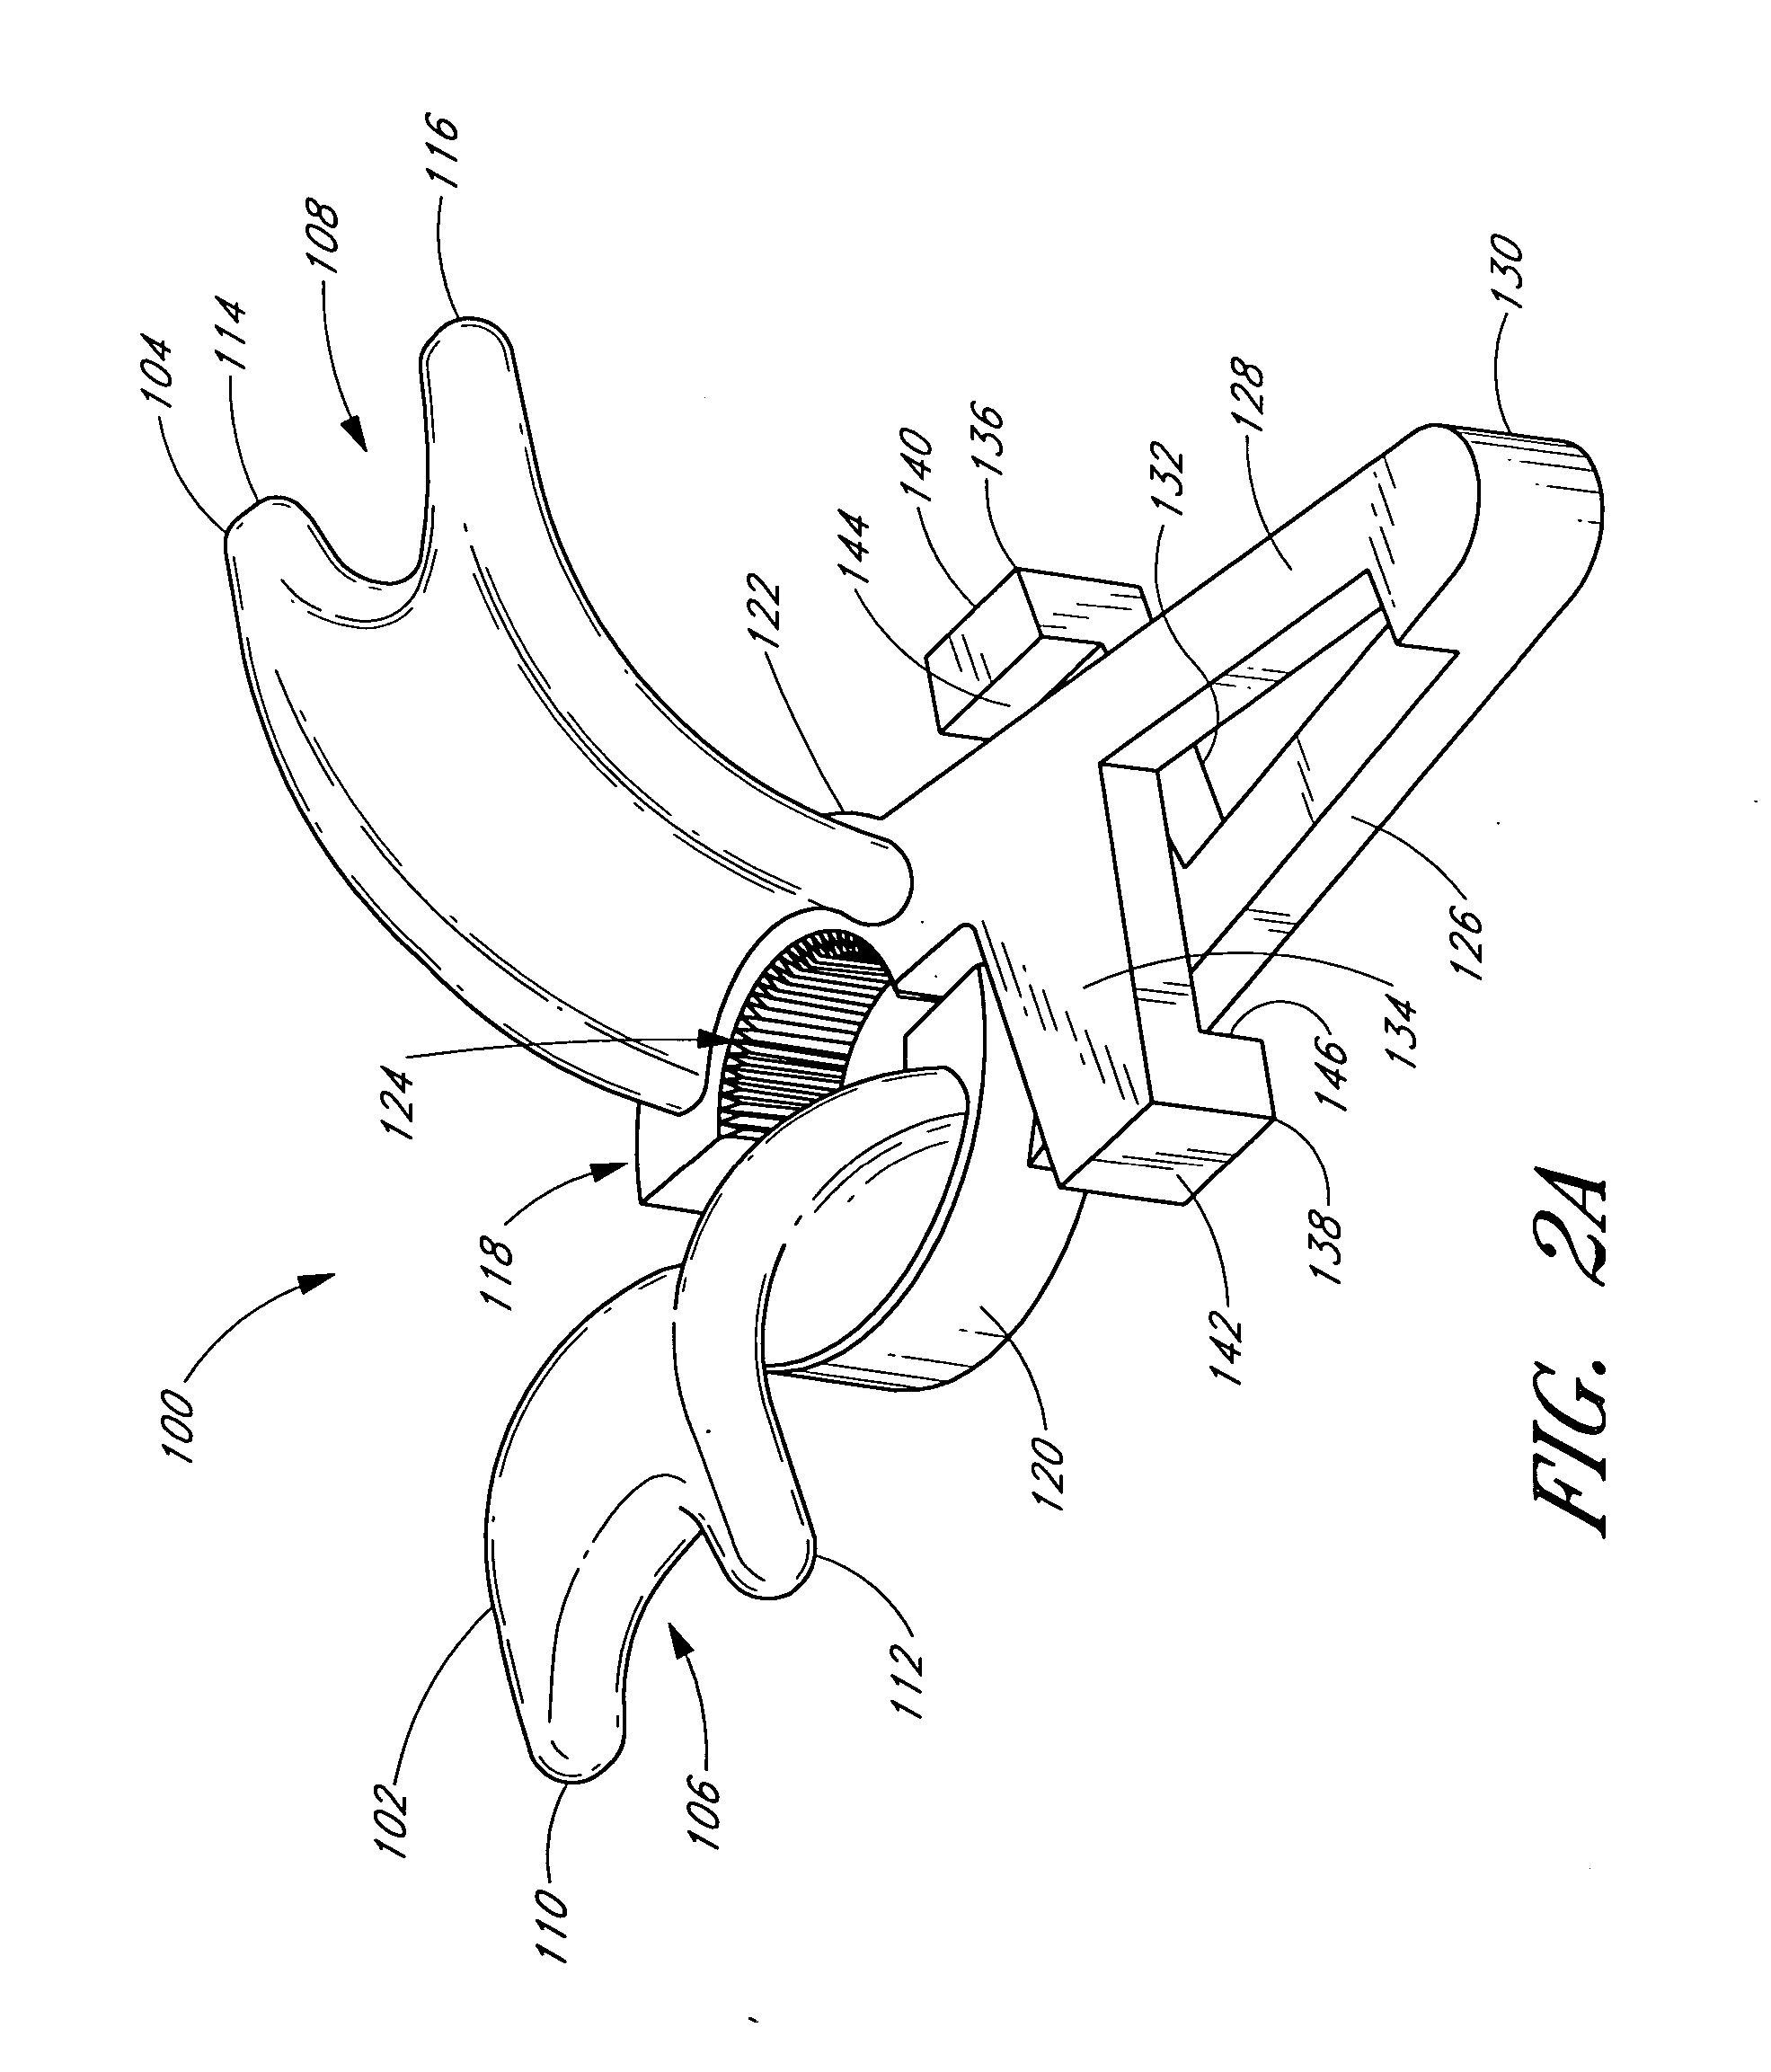 Method and apparatus for holding suture ends to facilitate tying of knots